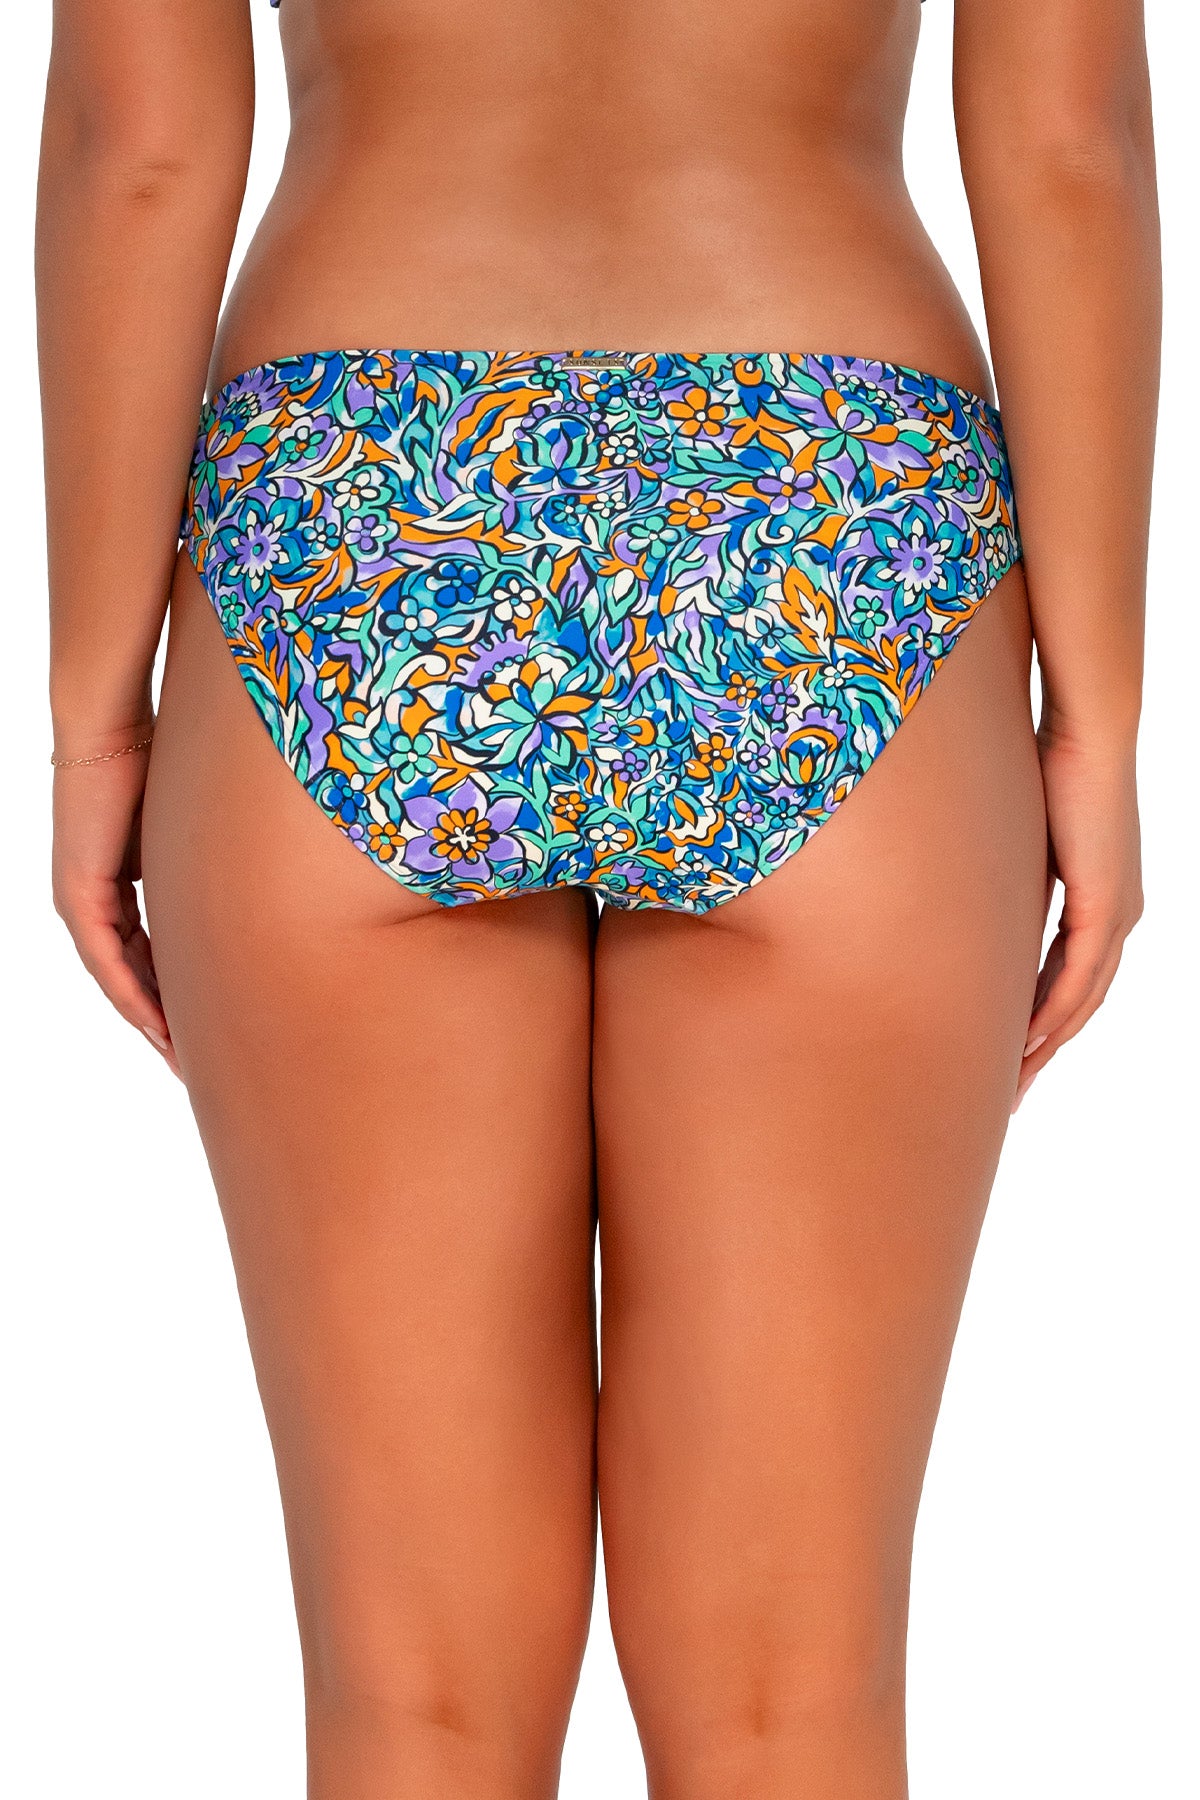 Back pose #4 of Taylor wearing Sunsets Pansy Fields Audra Hipster Bottom